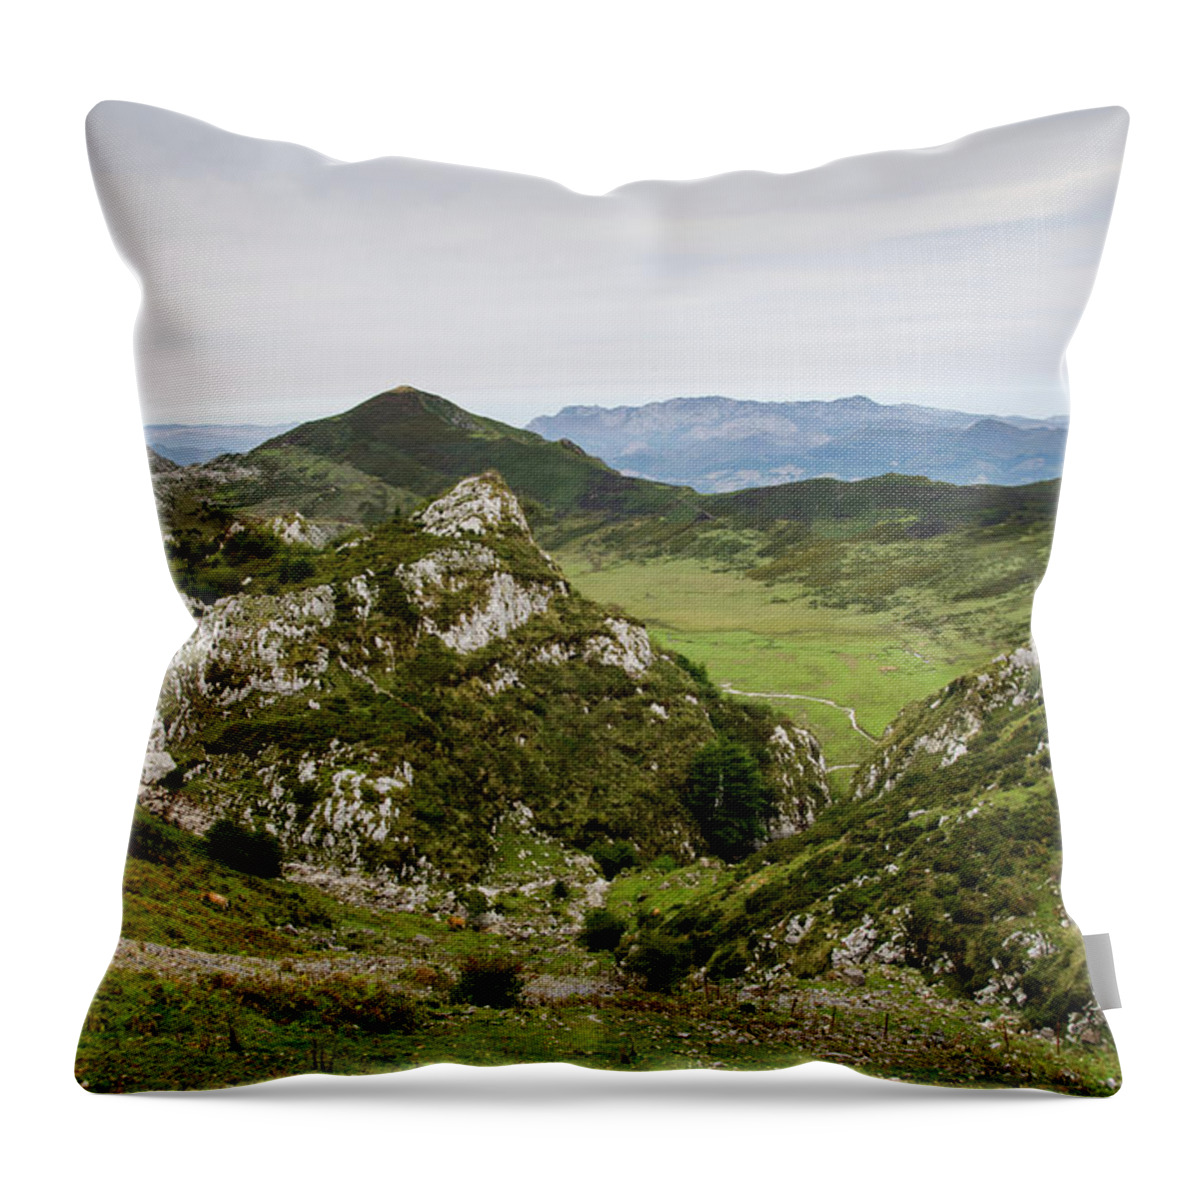 Scenics Throw Pillow featuring the photograph Landscape Of The Picos De Europa by Megan Ahrens